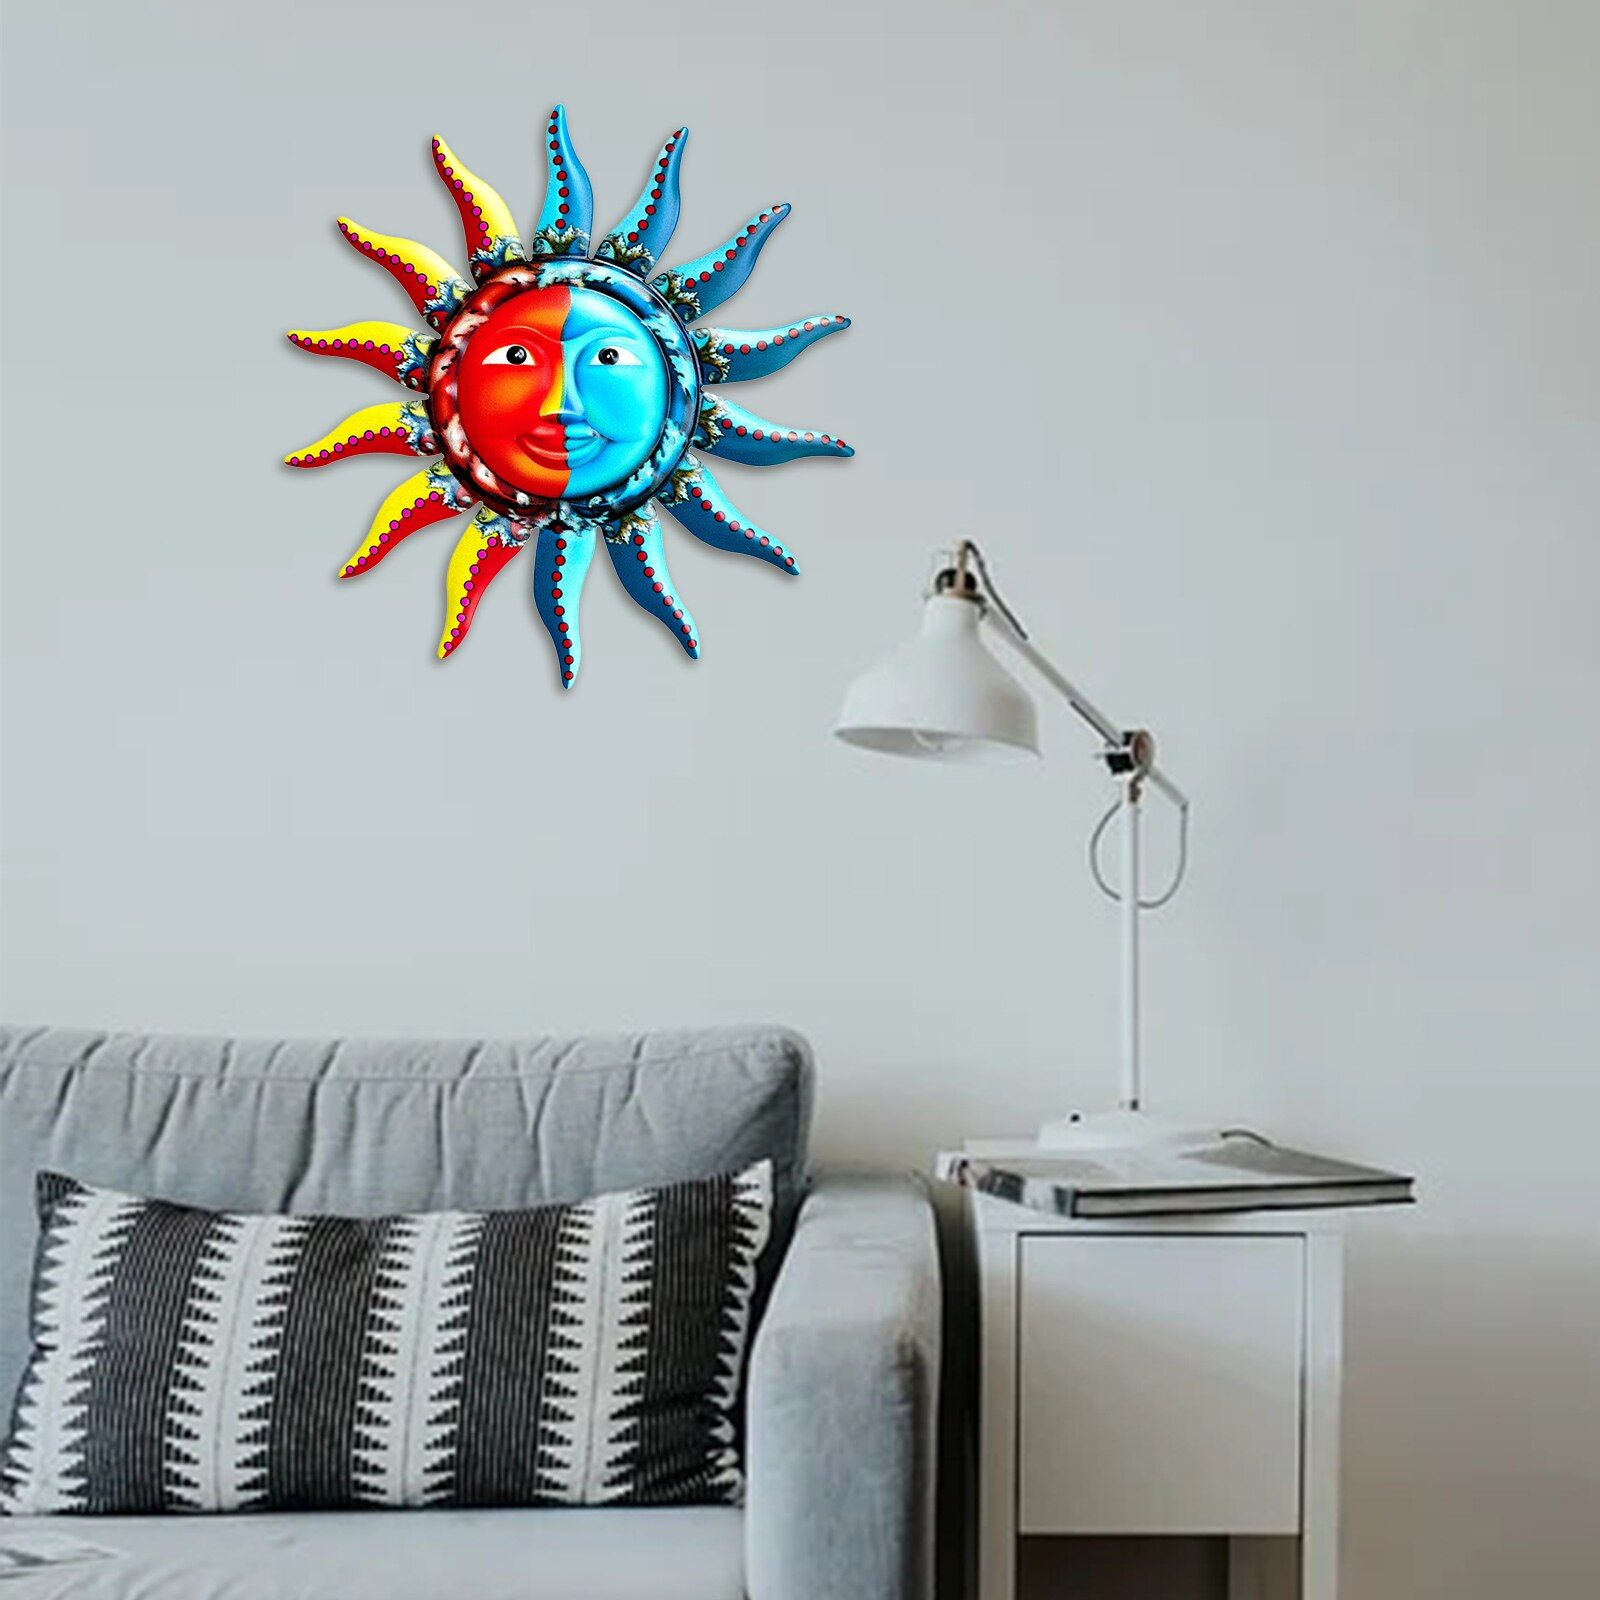 Metal Wall Art Sun Shaped Decoration Outside Wall Abstract Art Home Decor  Wall Hanging Heavy Duty Iron Wall Sculpture – Statues & Sculptures –  Aliexpress With Regard To Current Heavy Duty Wall Art (View 11 of 20)